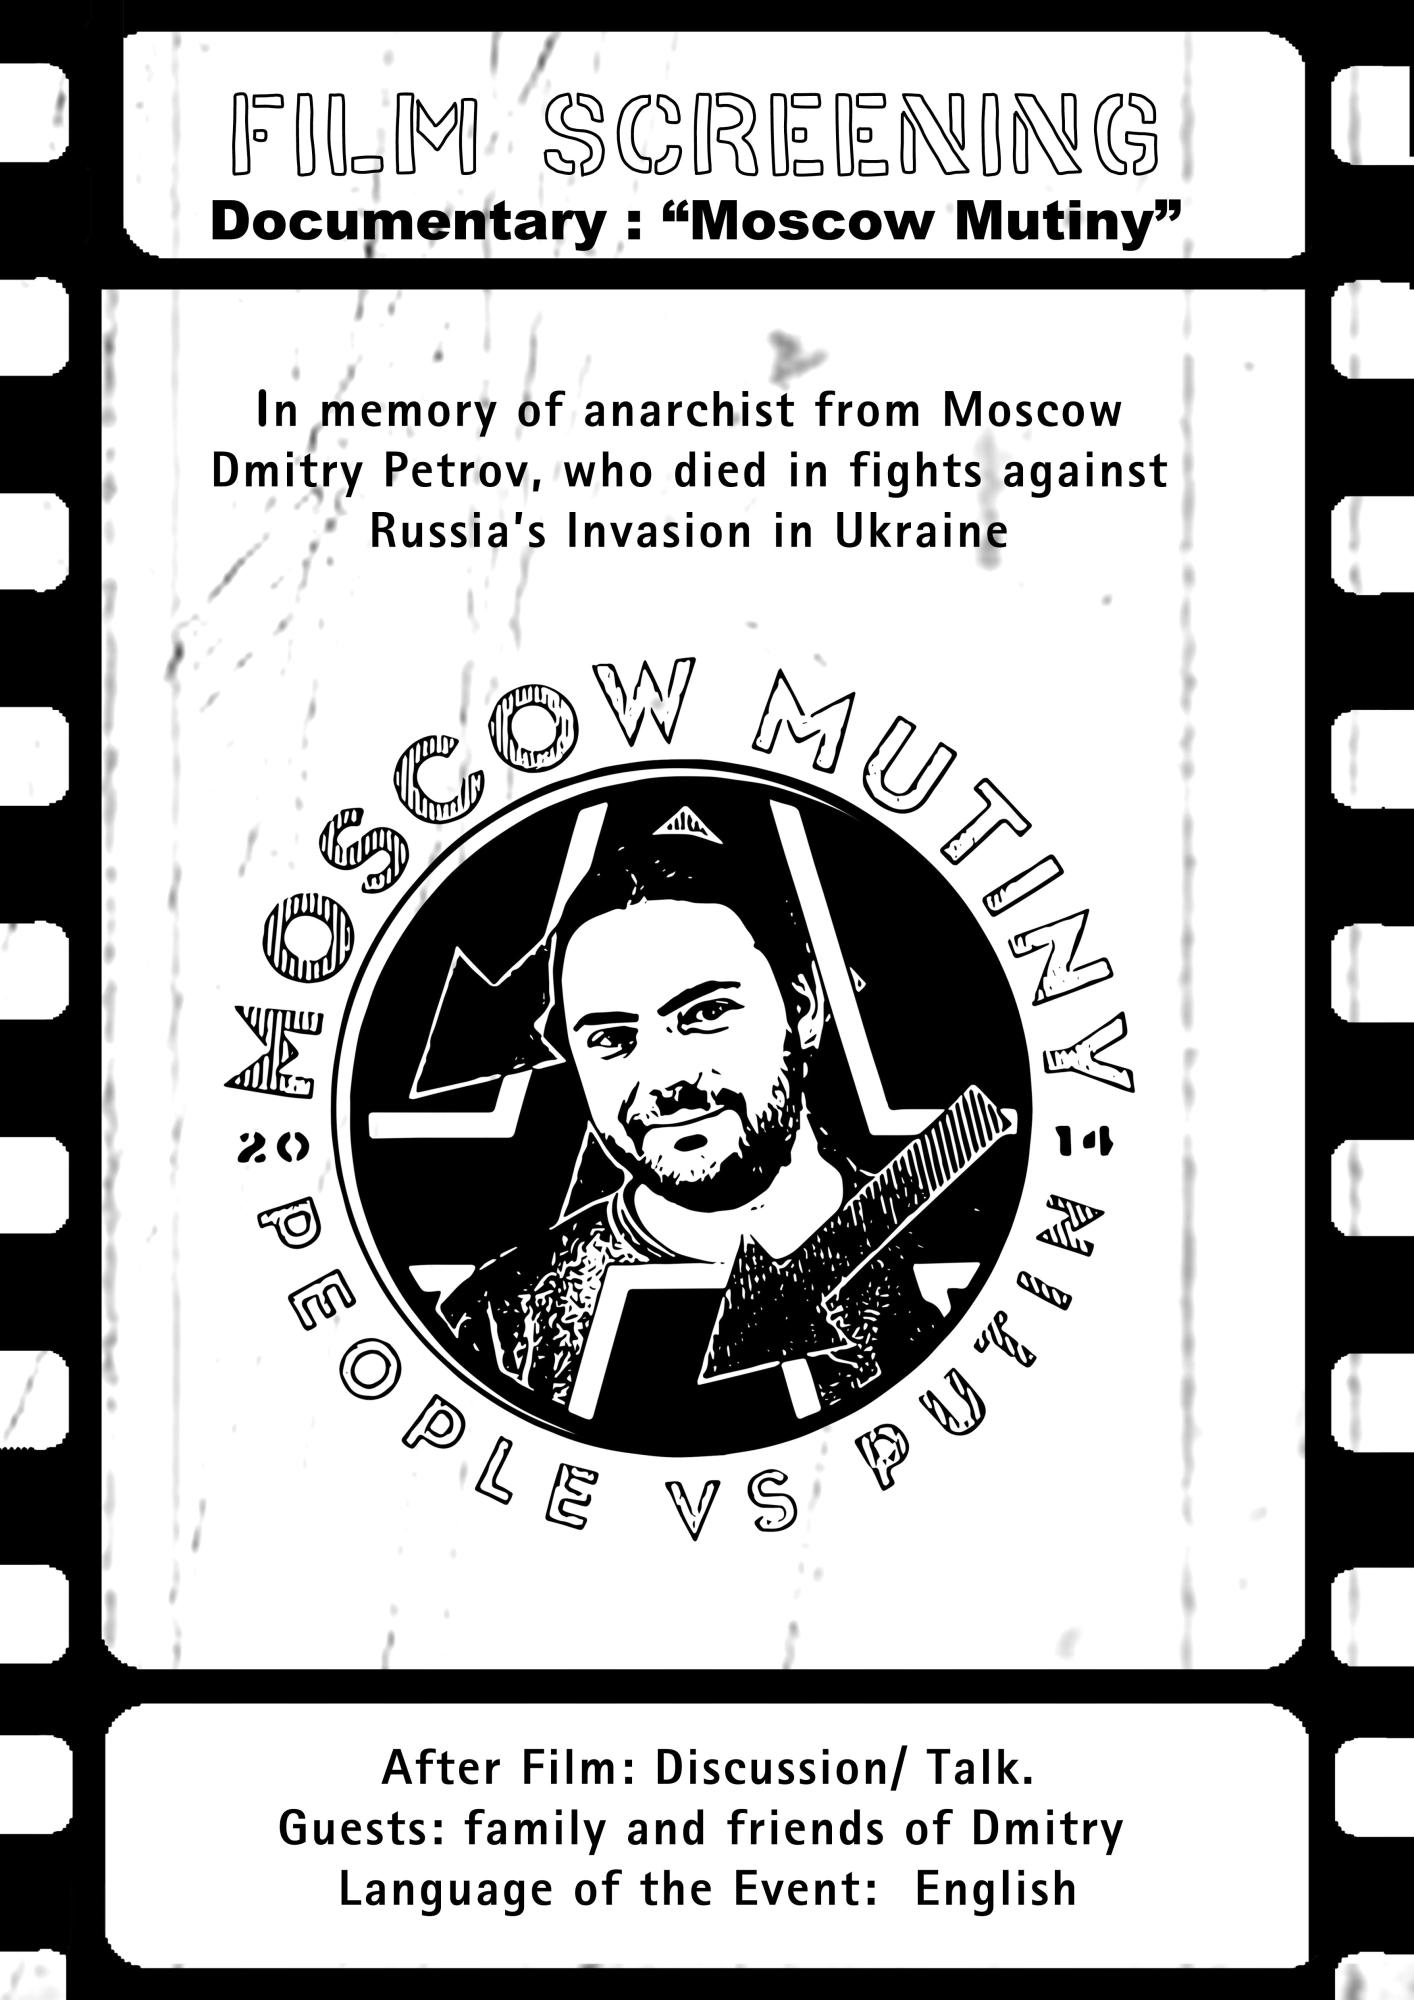 Film screening and discussion on the documentary "Moscow Mutiny"